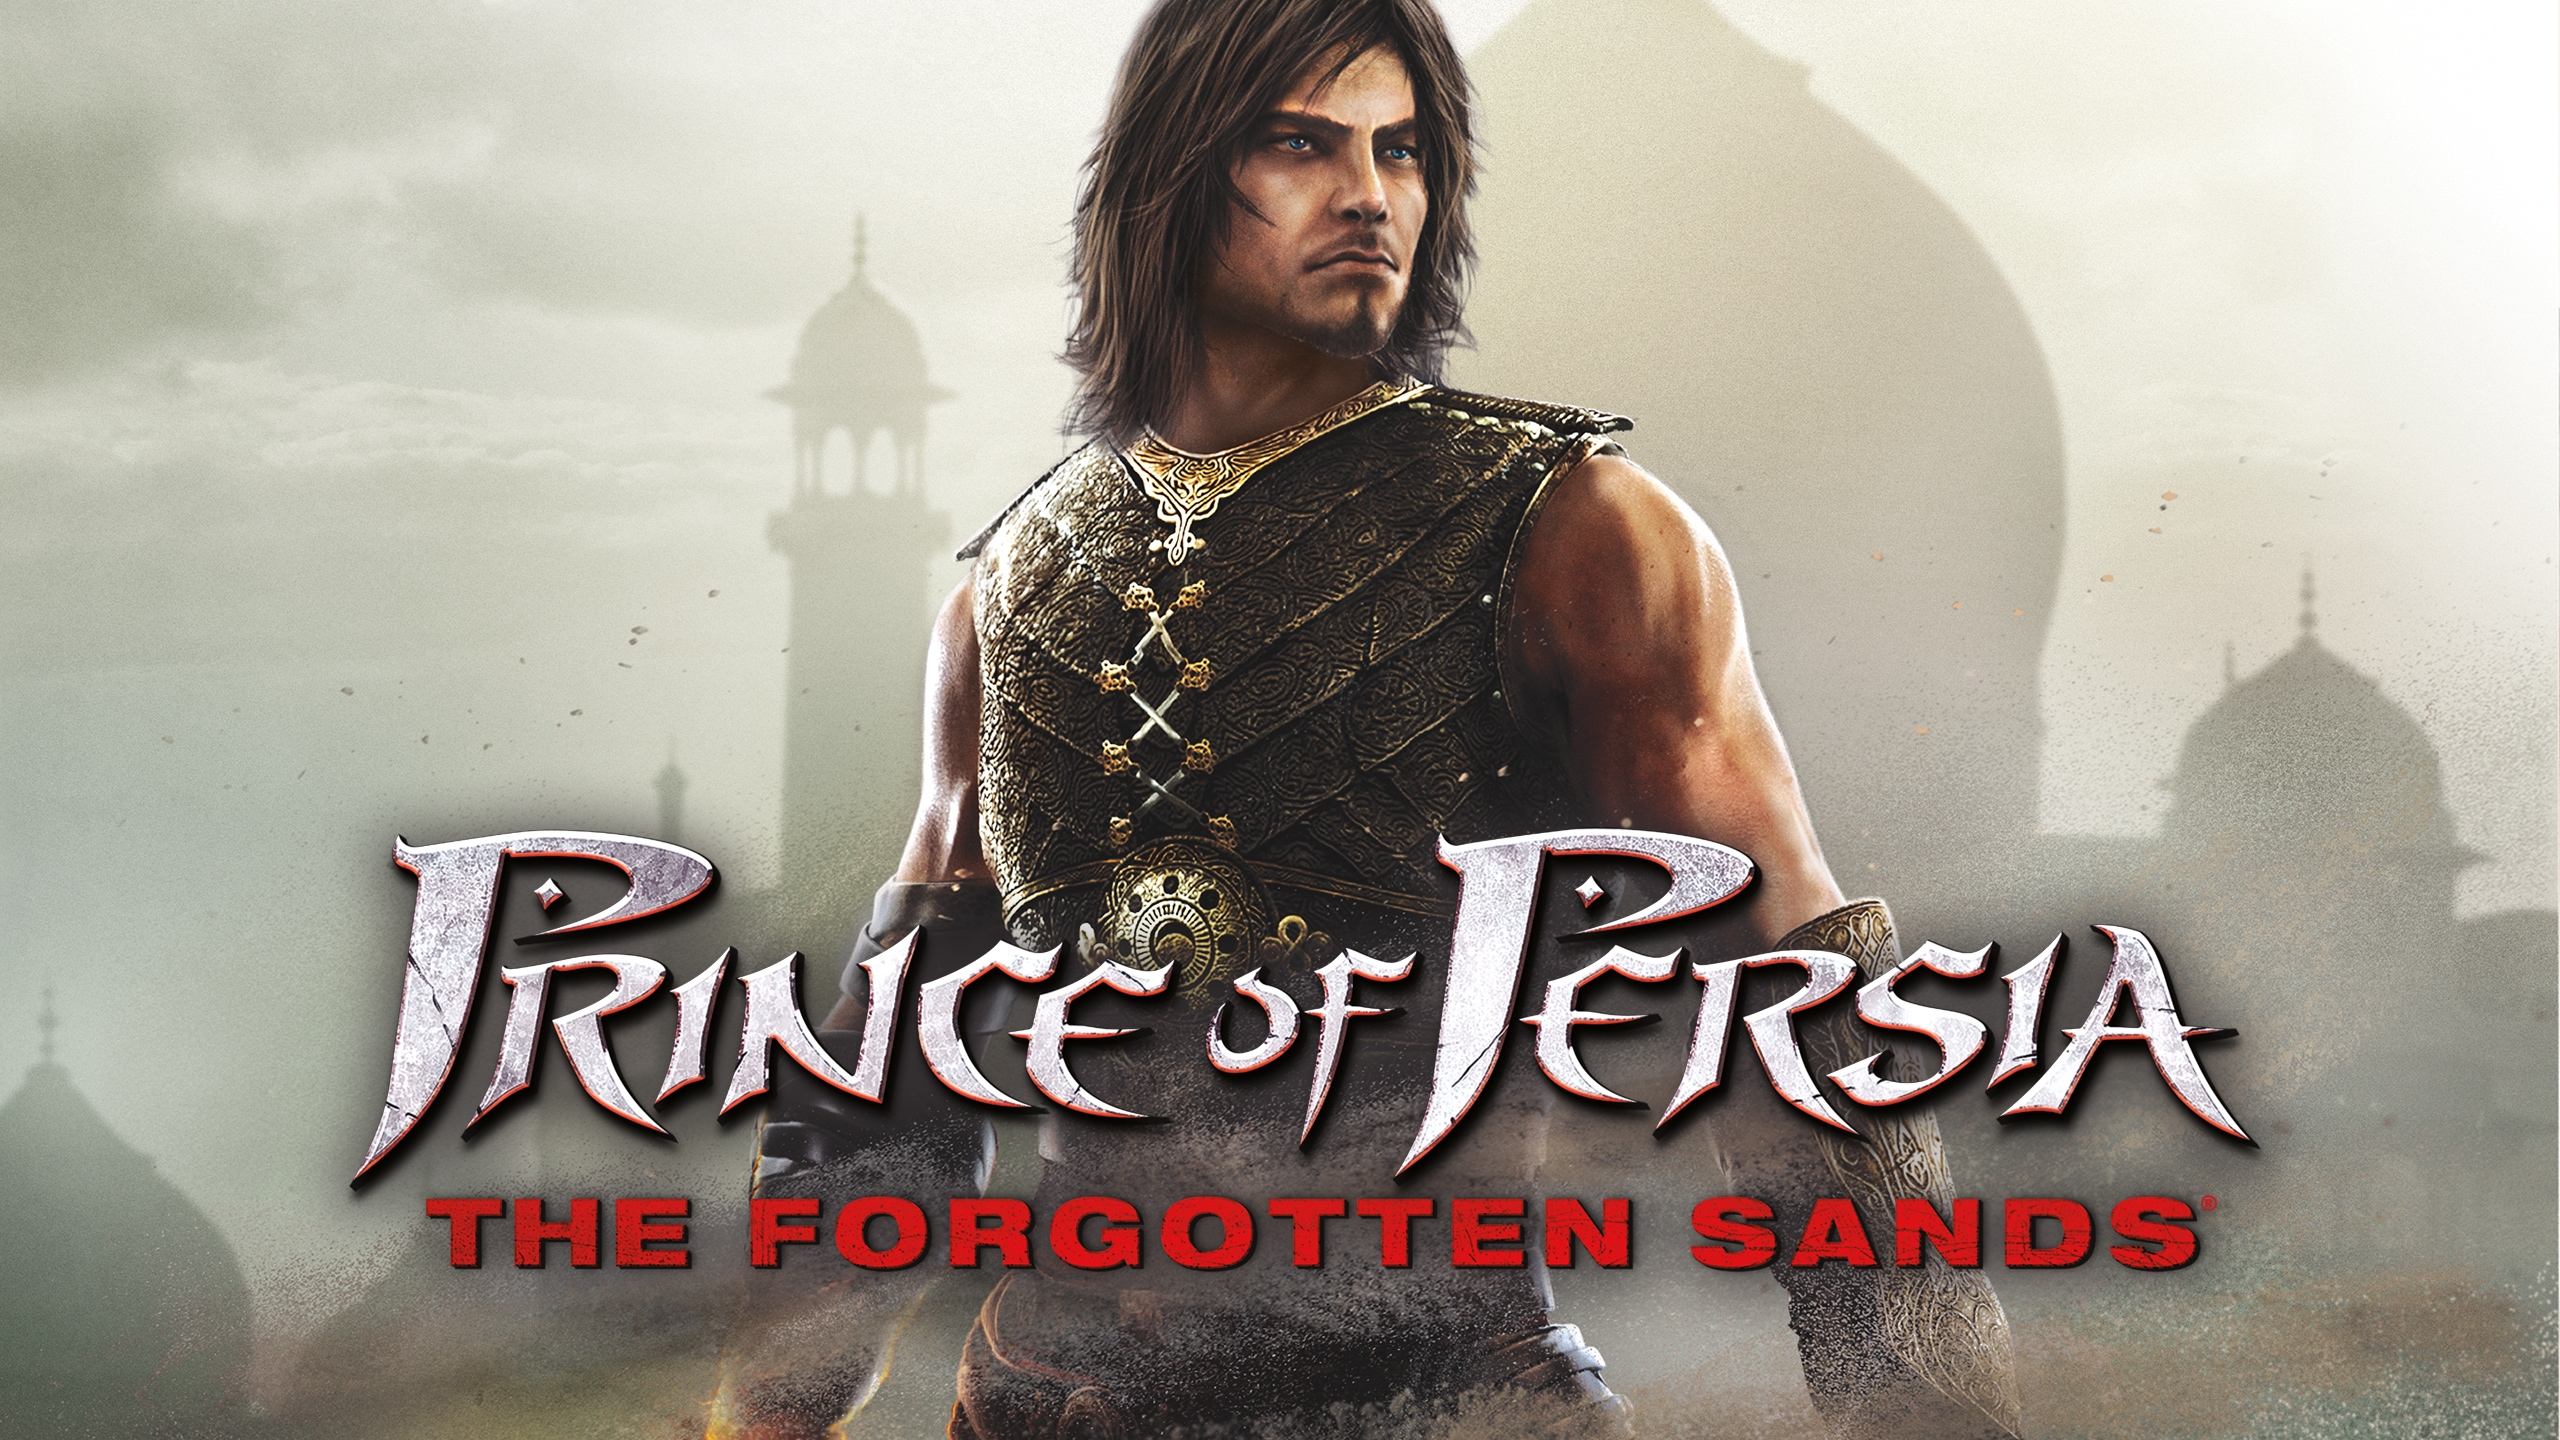 prince of percia game